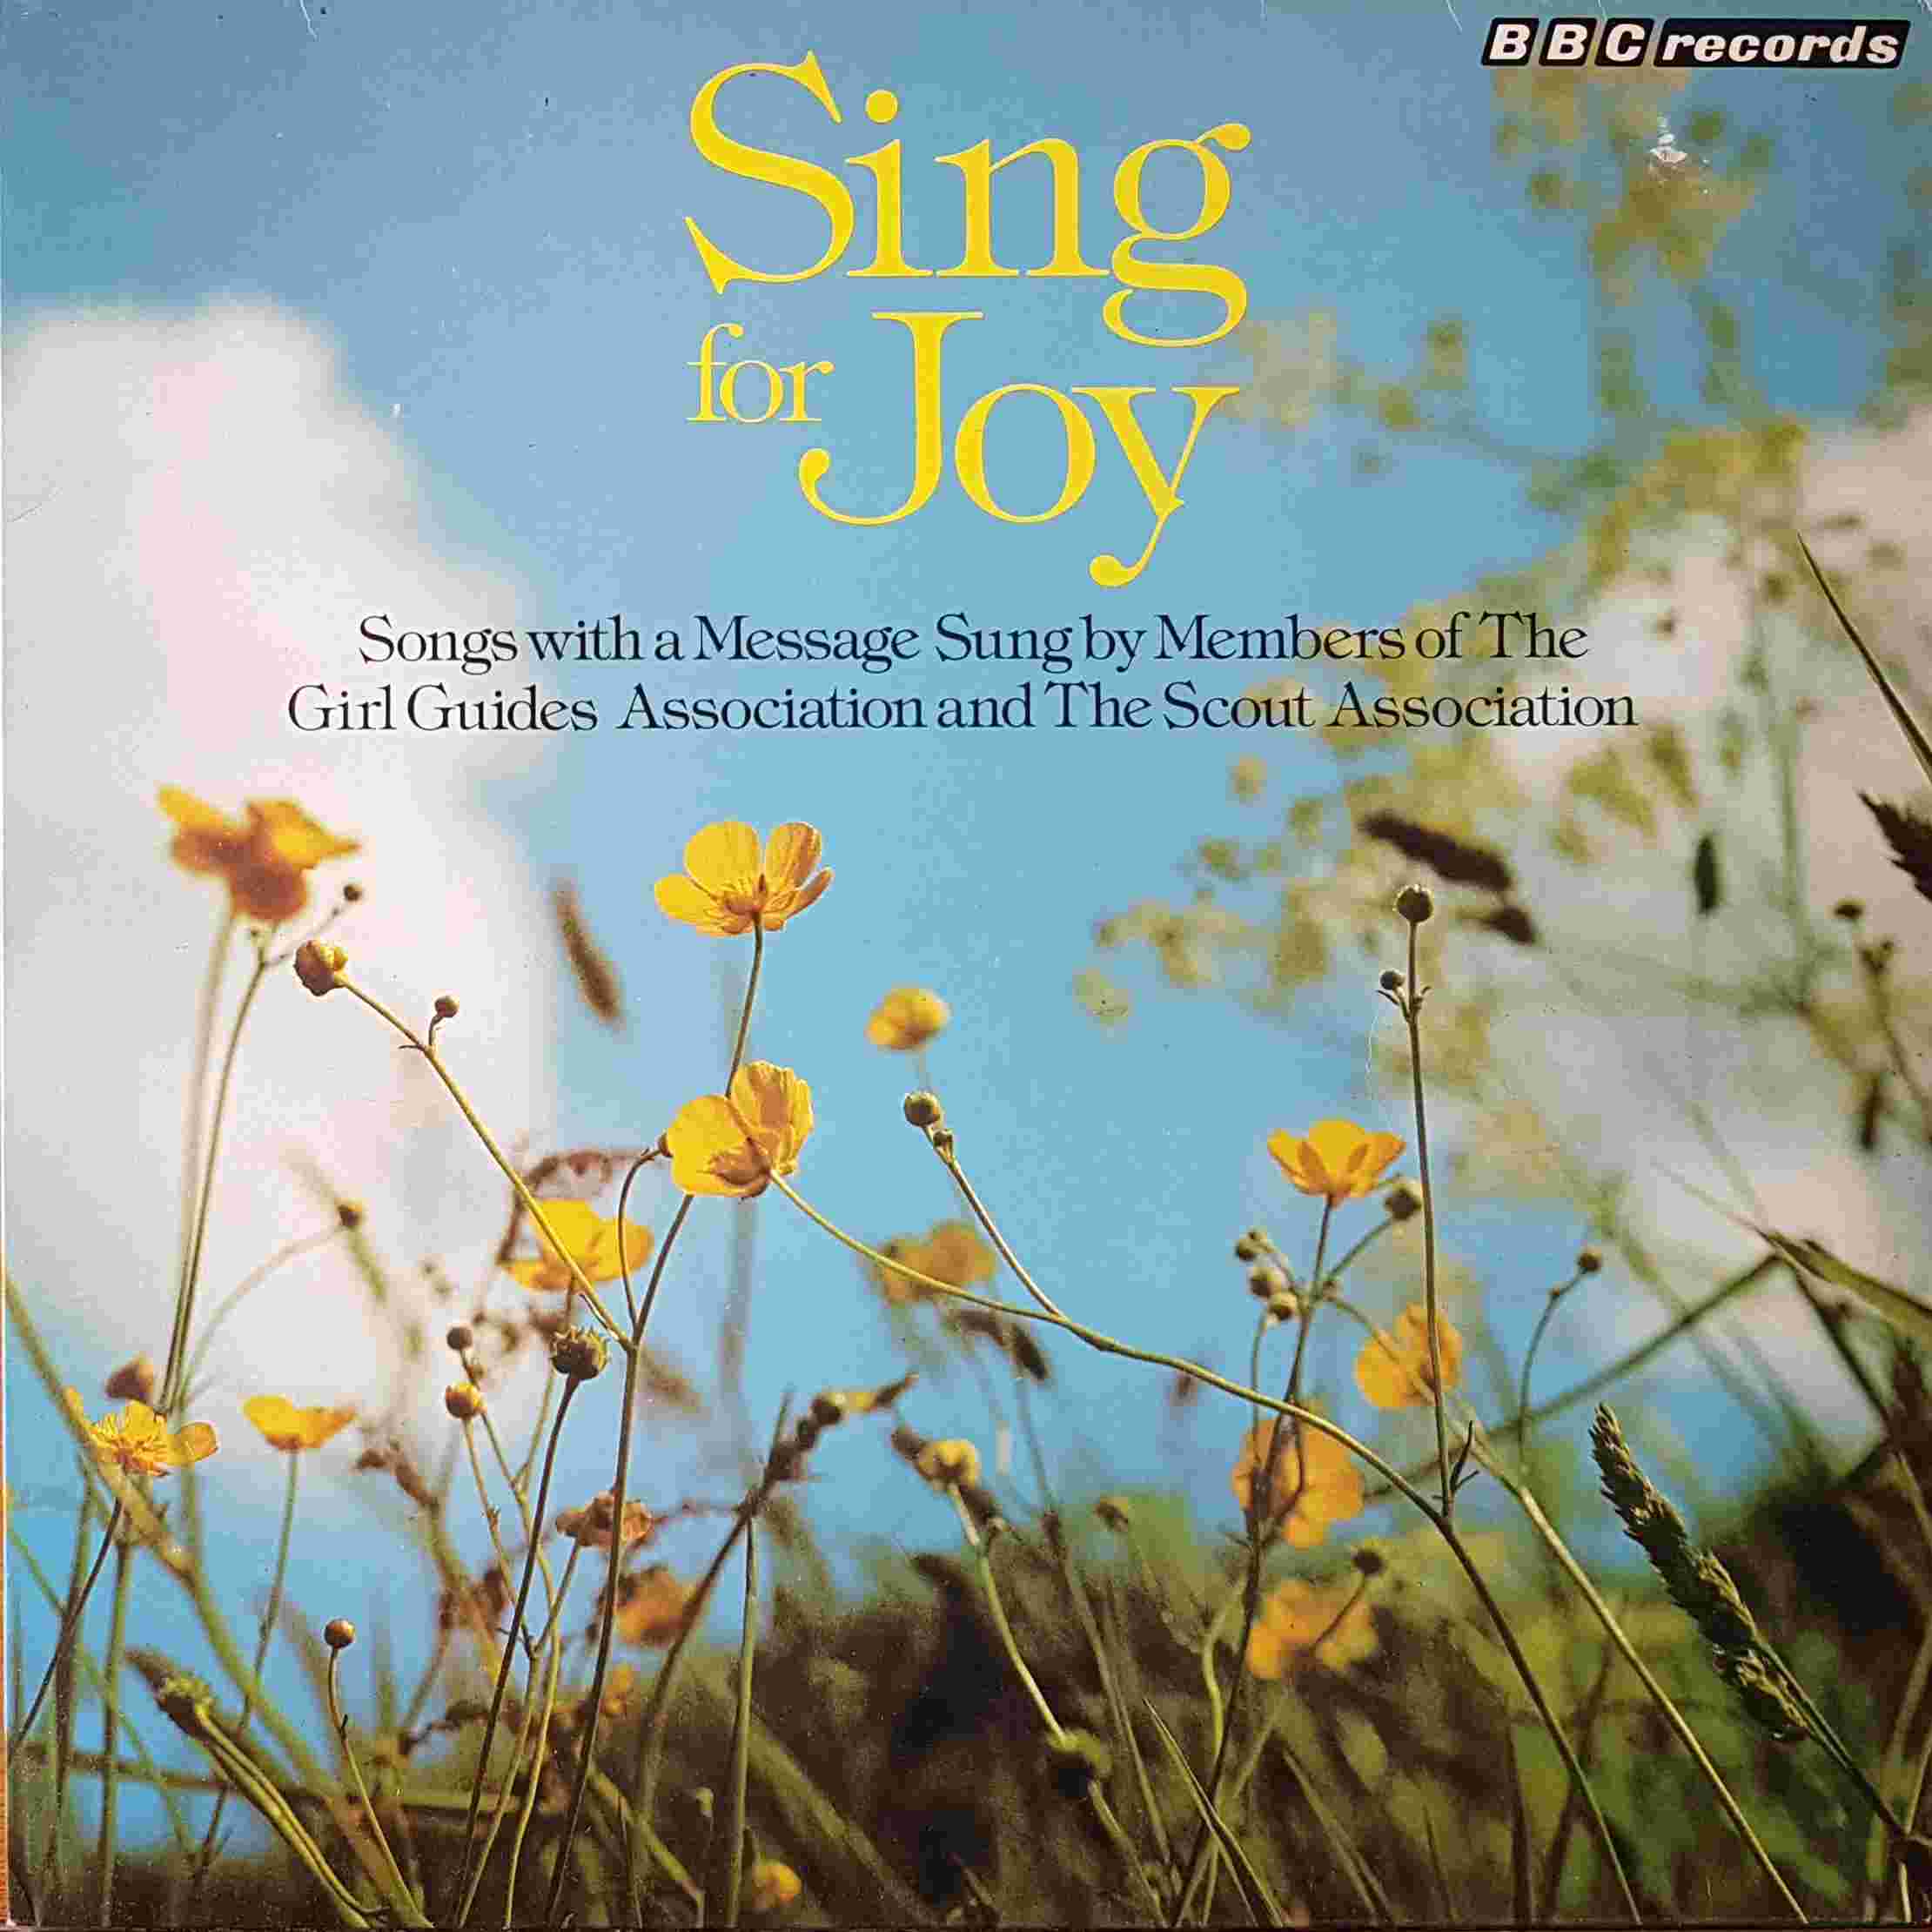 Picture of REC 328 Sing for joy by artist Various from the BBC albums - Records and Tapes library